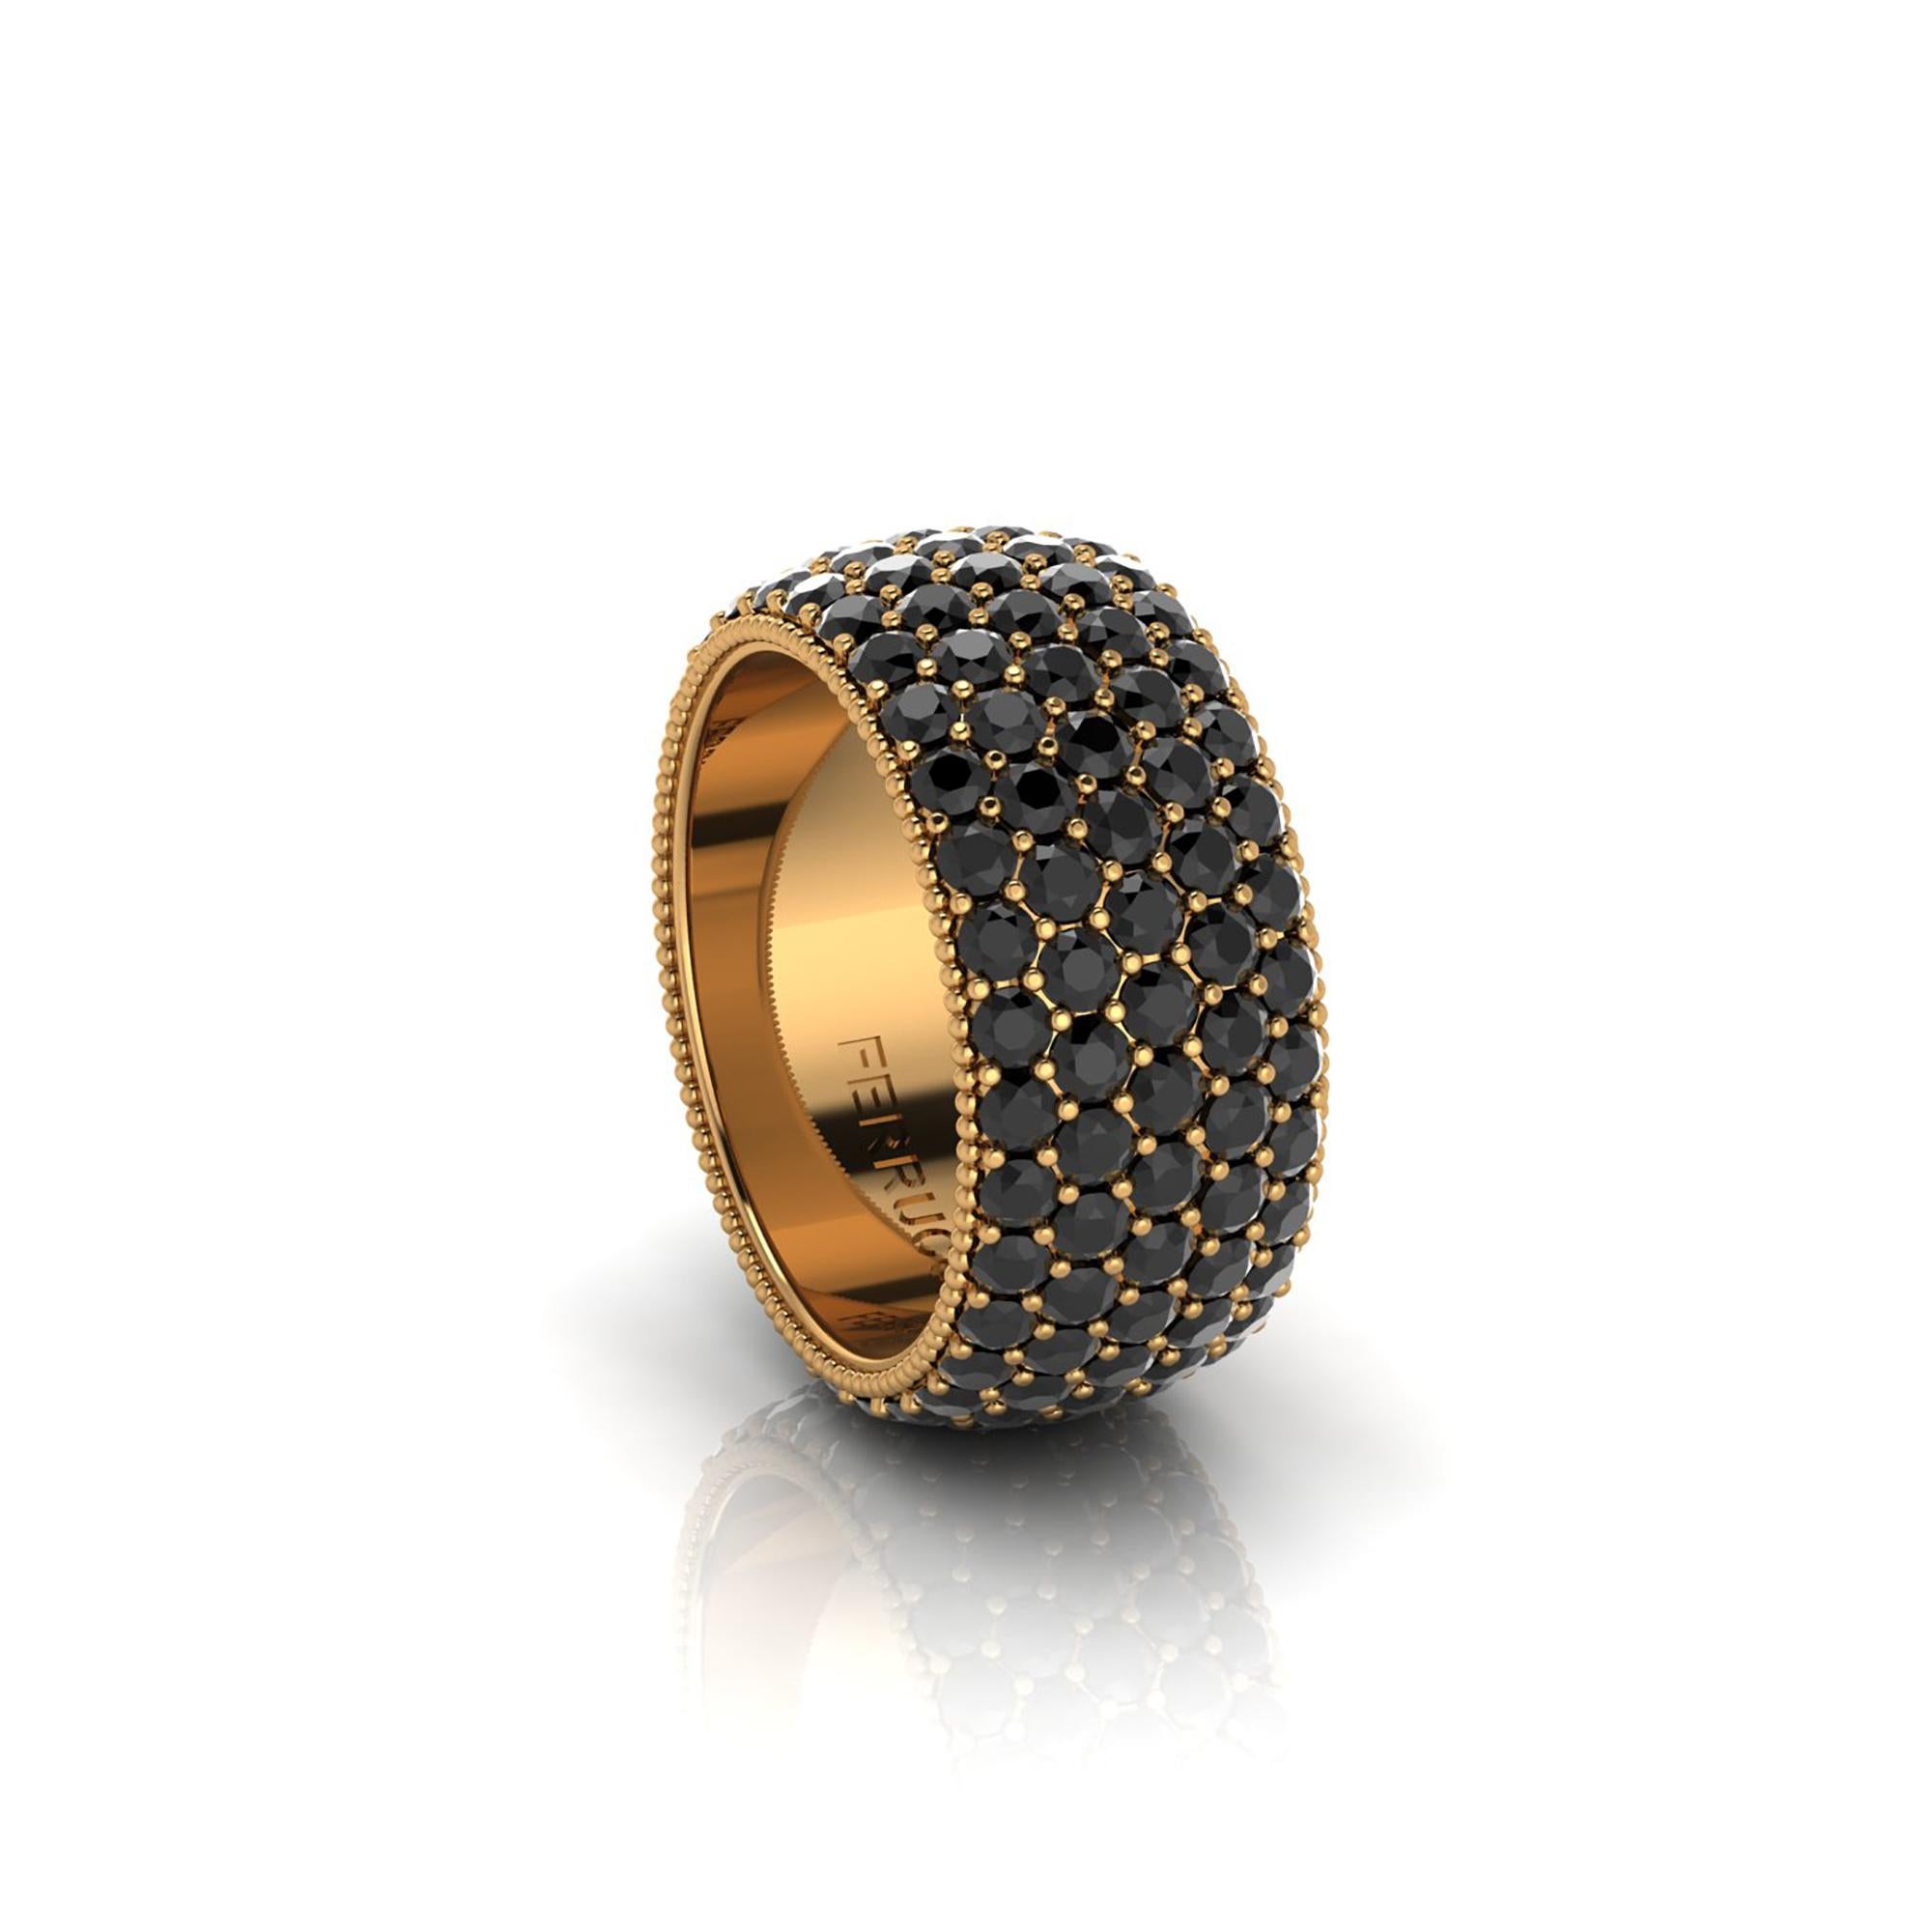 Wide diamond pave' ring, with a slightly dome feeling, a wrap of sparkling  black diamonds, for an approximate total carat weight of 4.70 carats, hand made in New York City by hand by  Italian master jeweler, conceived in 18k yellow gold 

This is a